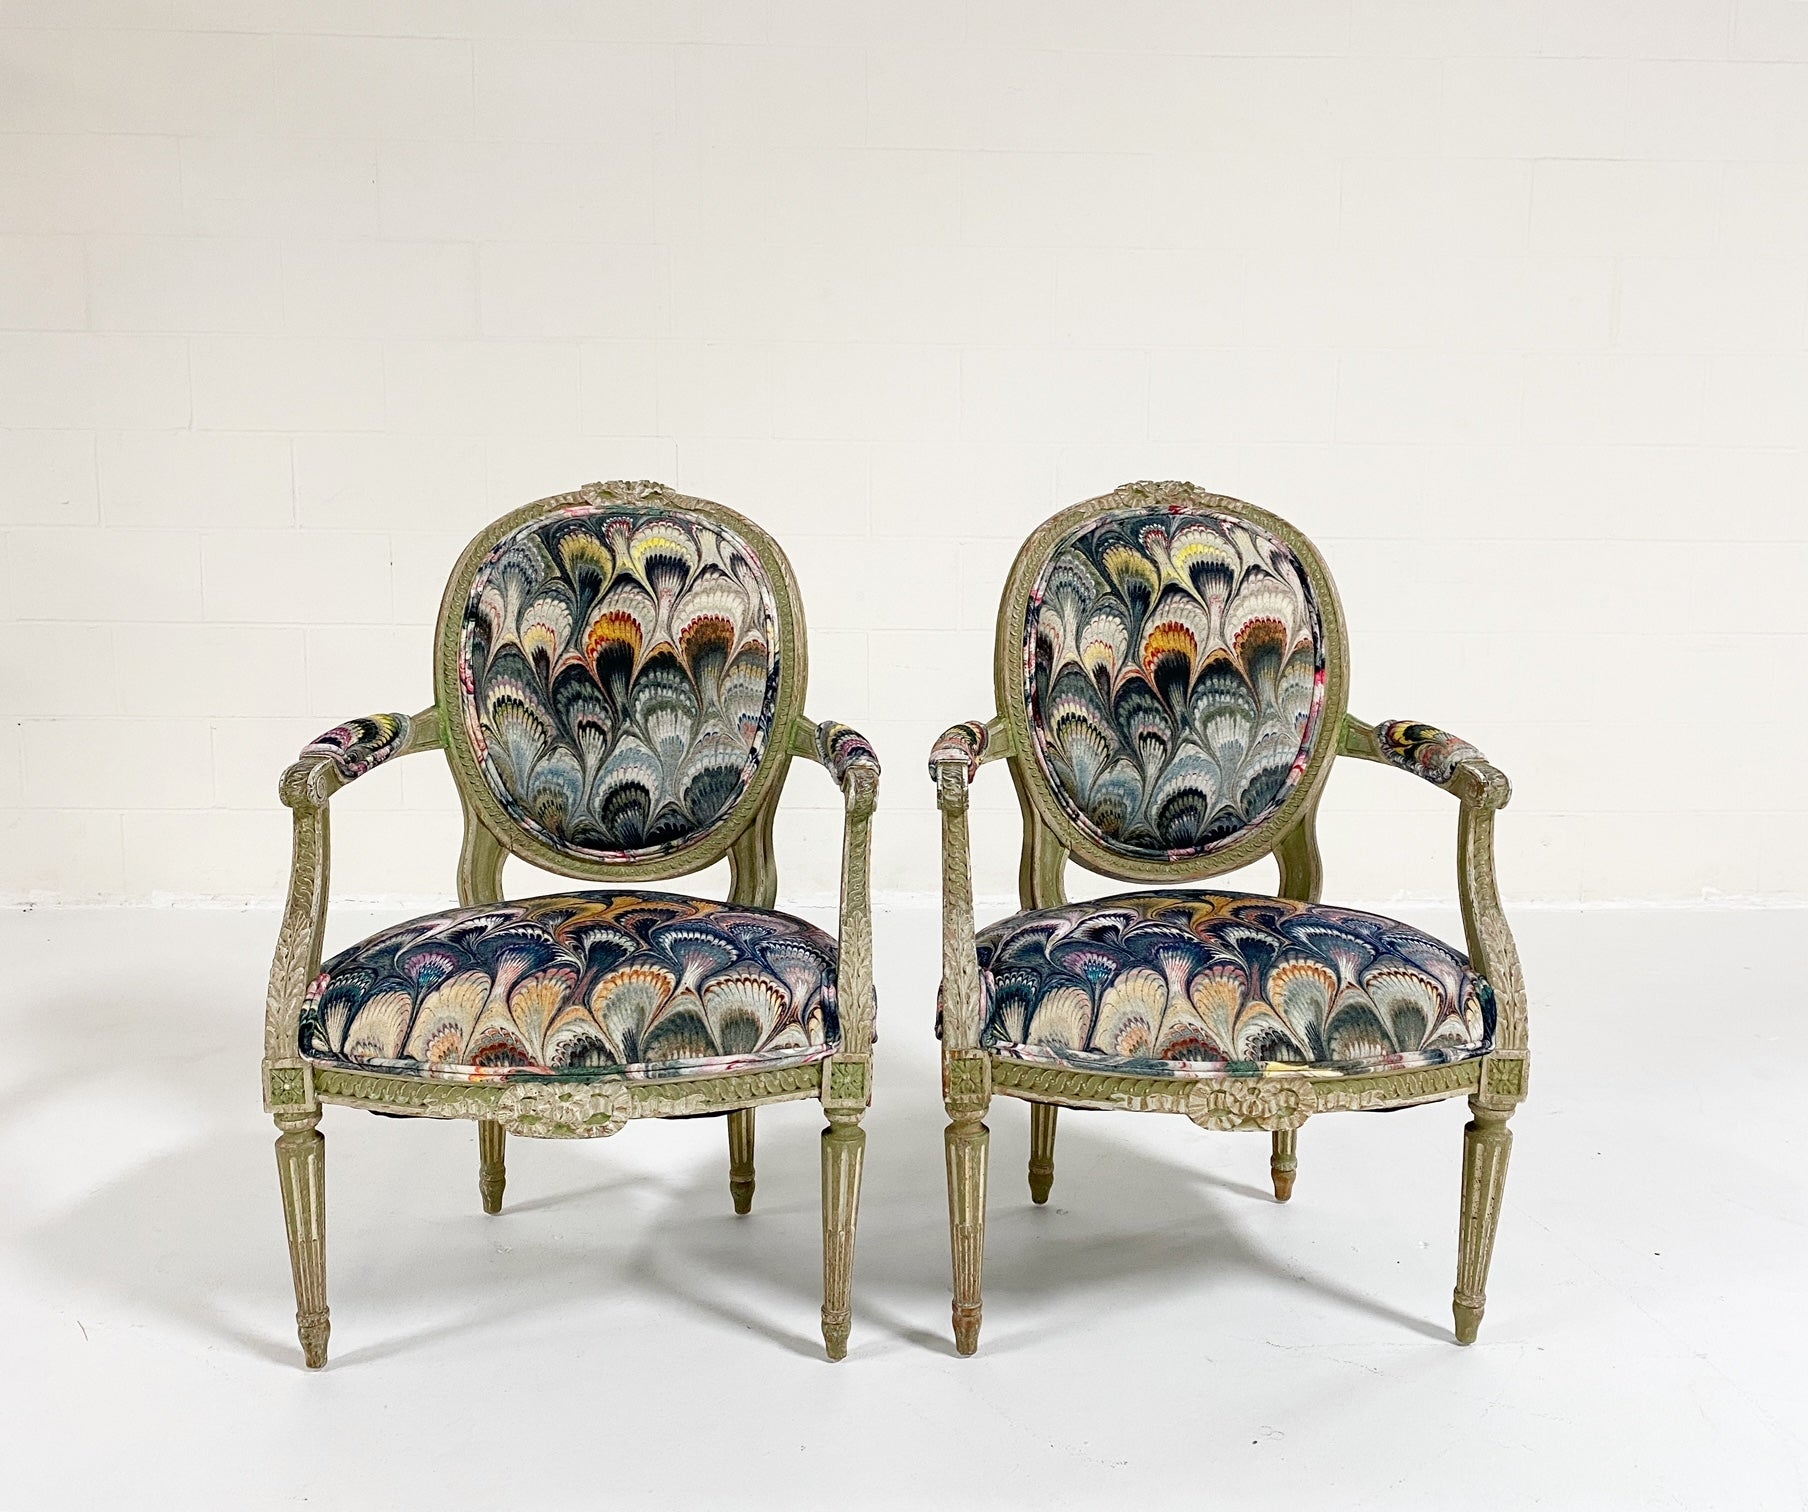 18th Century French Painted Chairs in Beata Heuman "Marbleized Velvet," pair